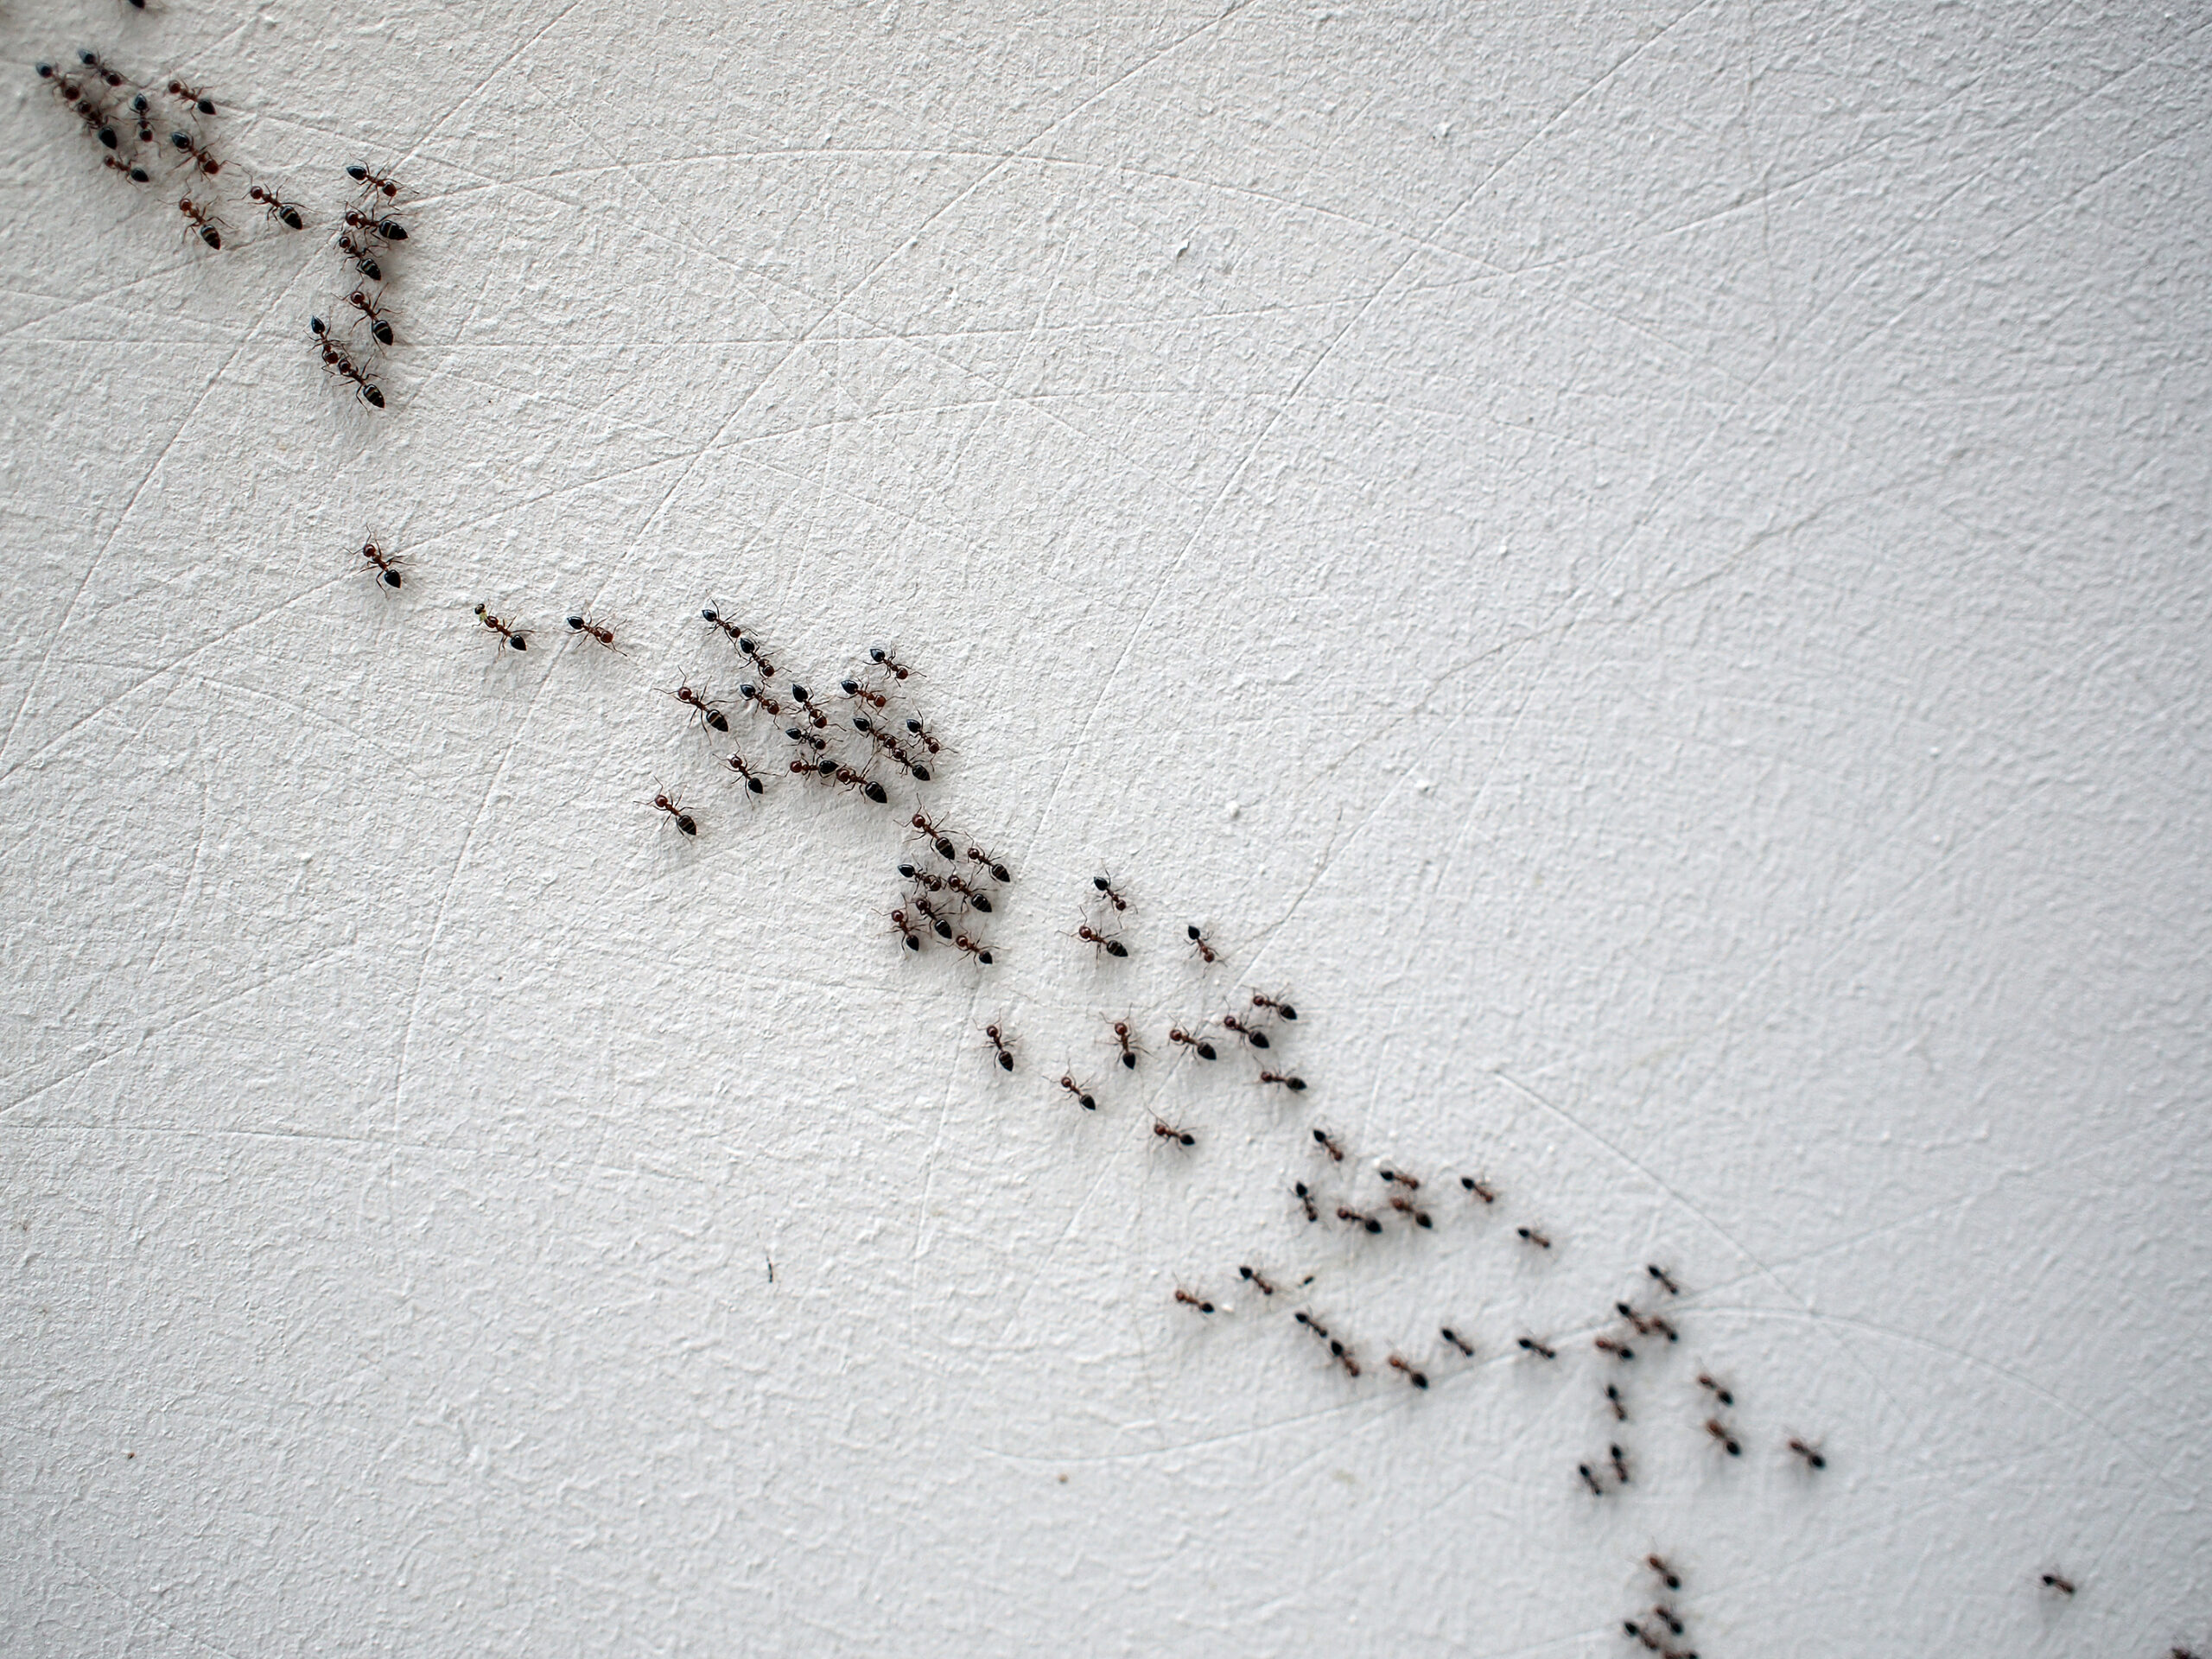 Group Of Ants Following Each Other In A Chain